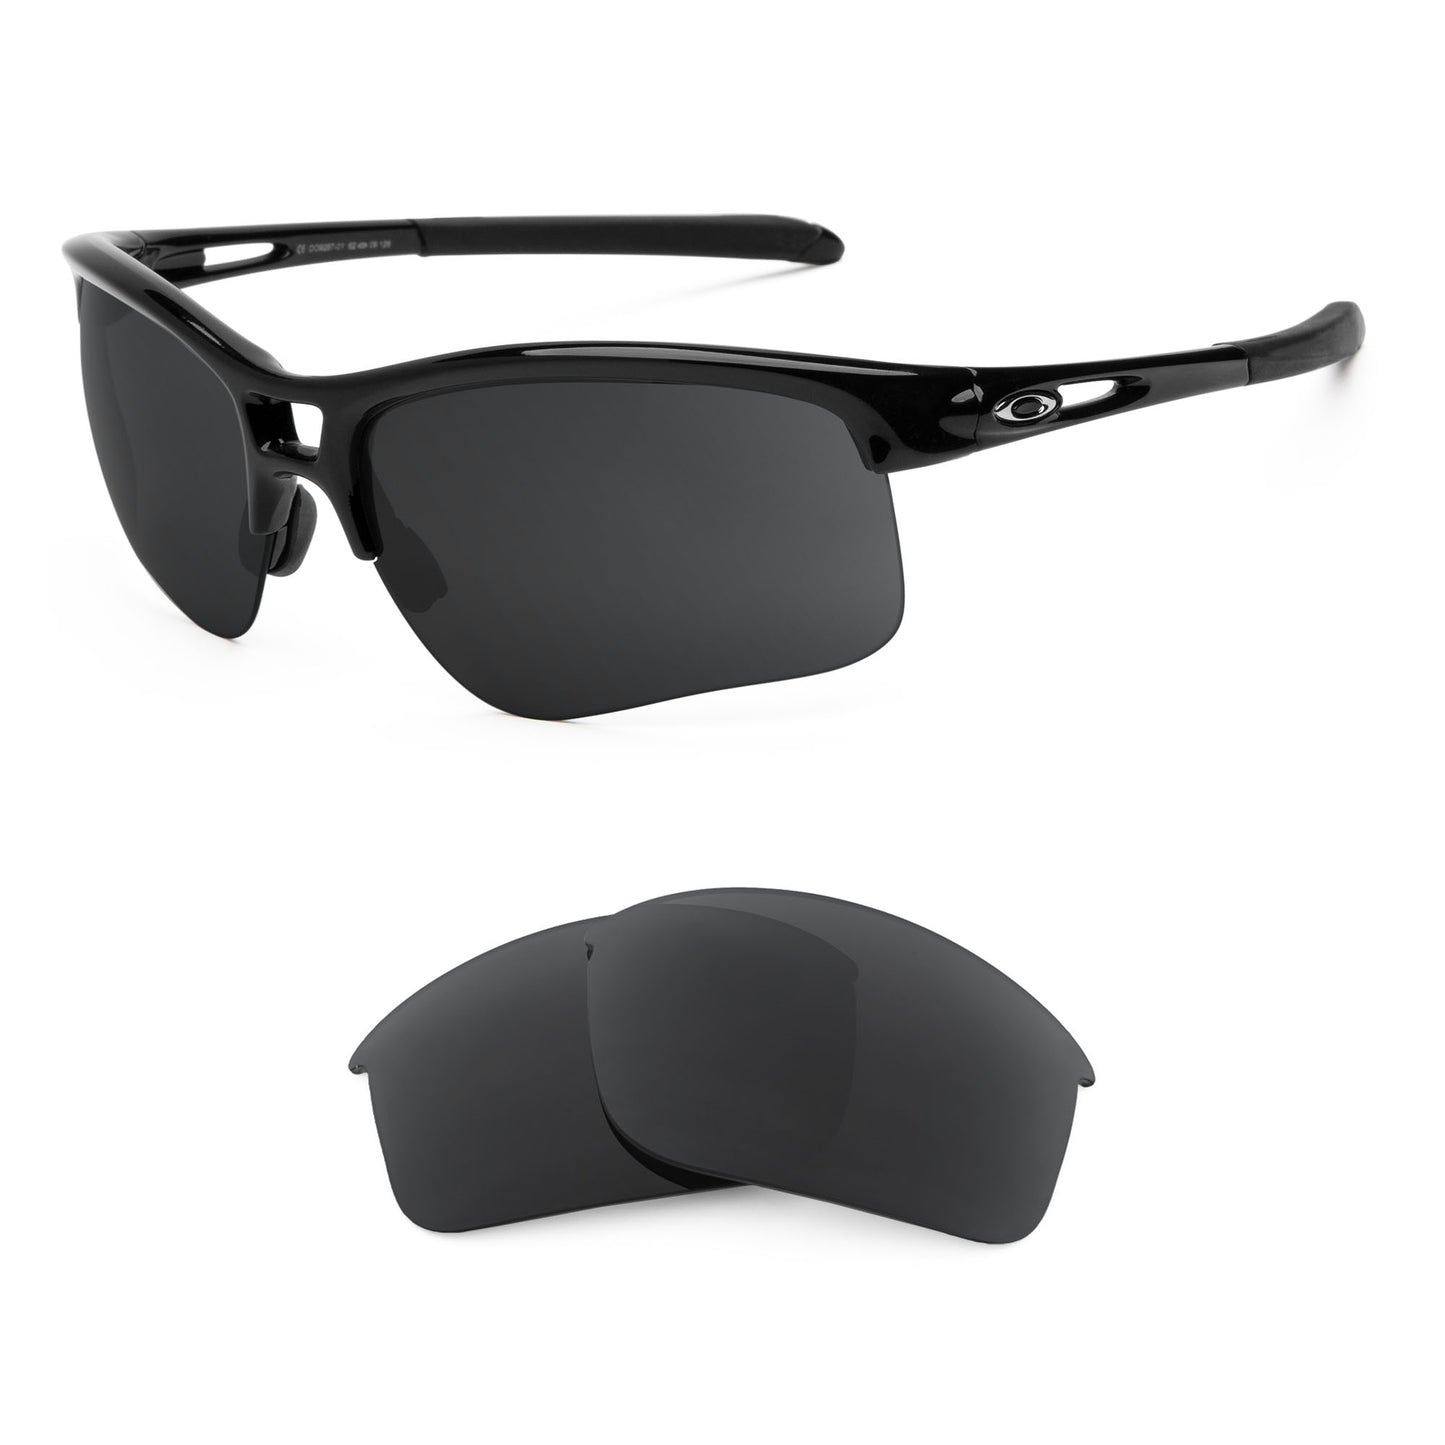 Oakley RPM Edge sunglasses with replacement lenses